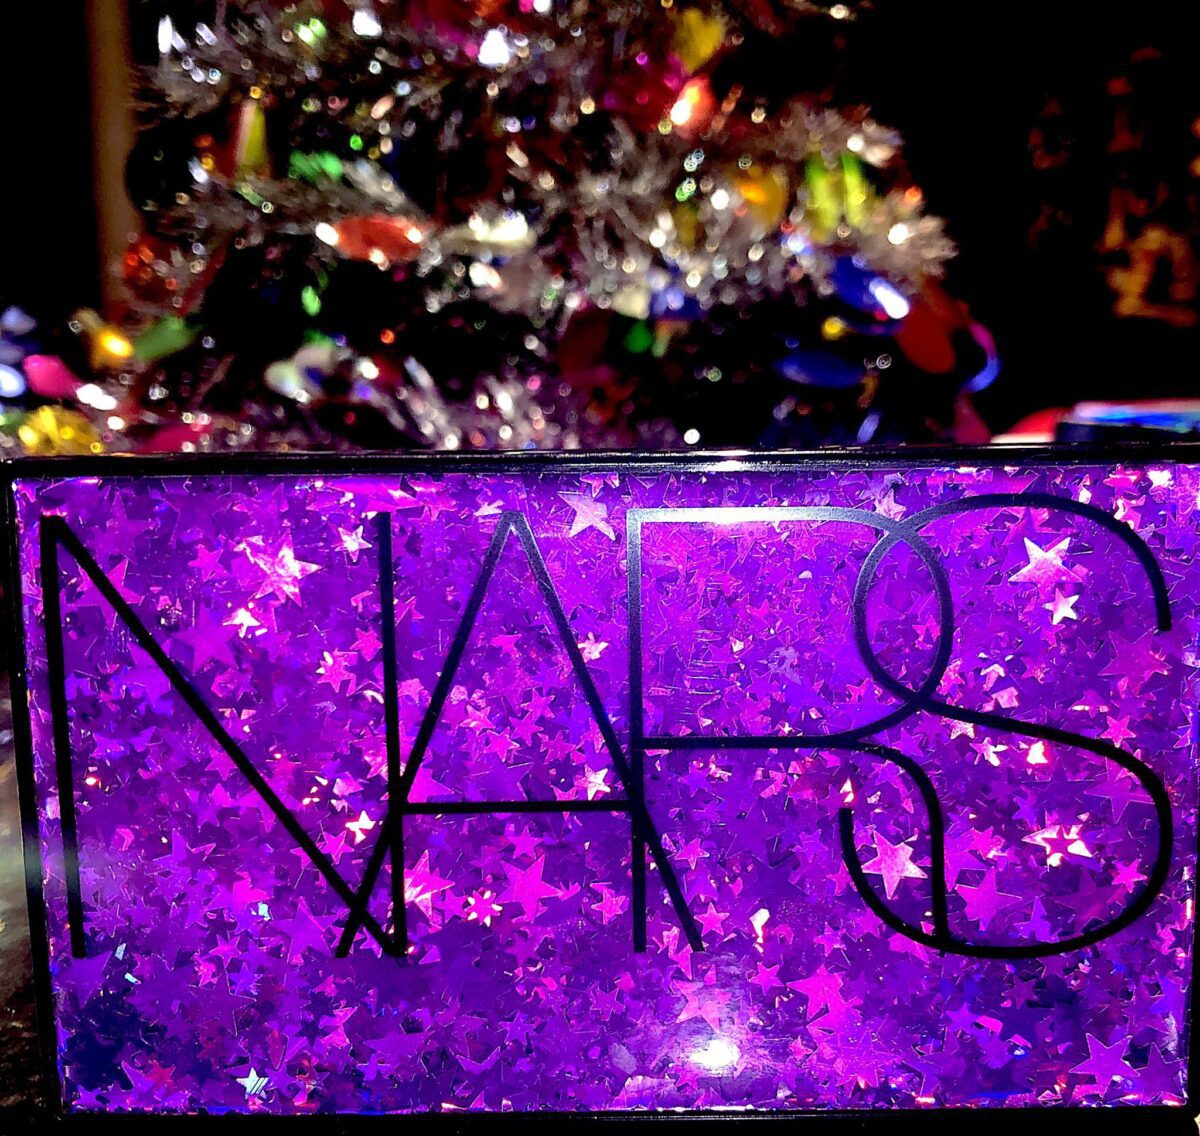 NARS STUDIO 54 HOLIDAY HYPED EYESHADOW PALETTE COMPACT CASE